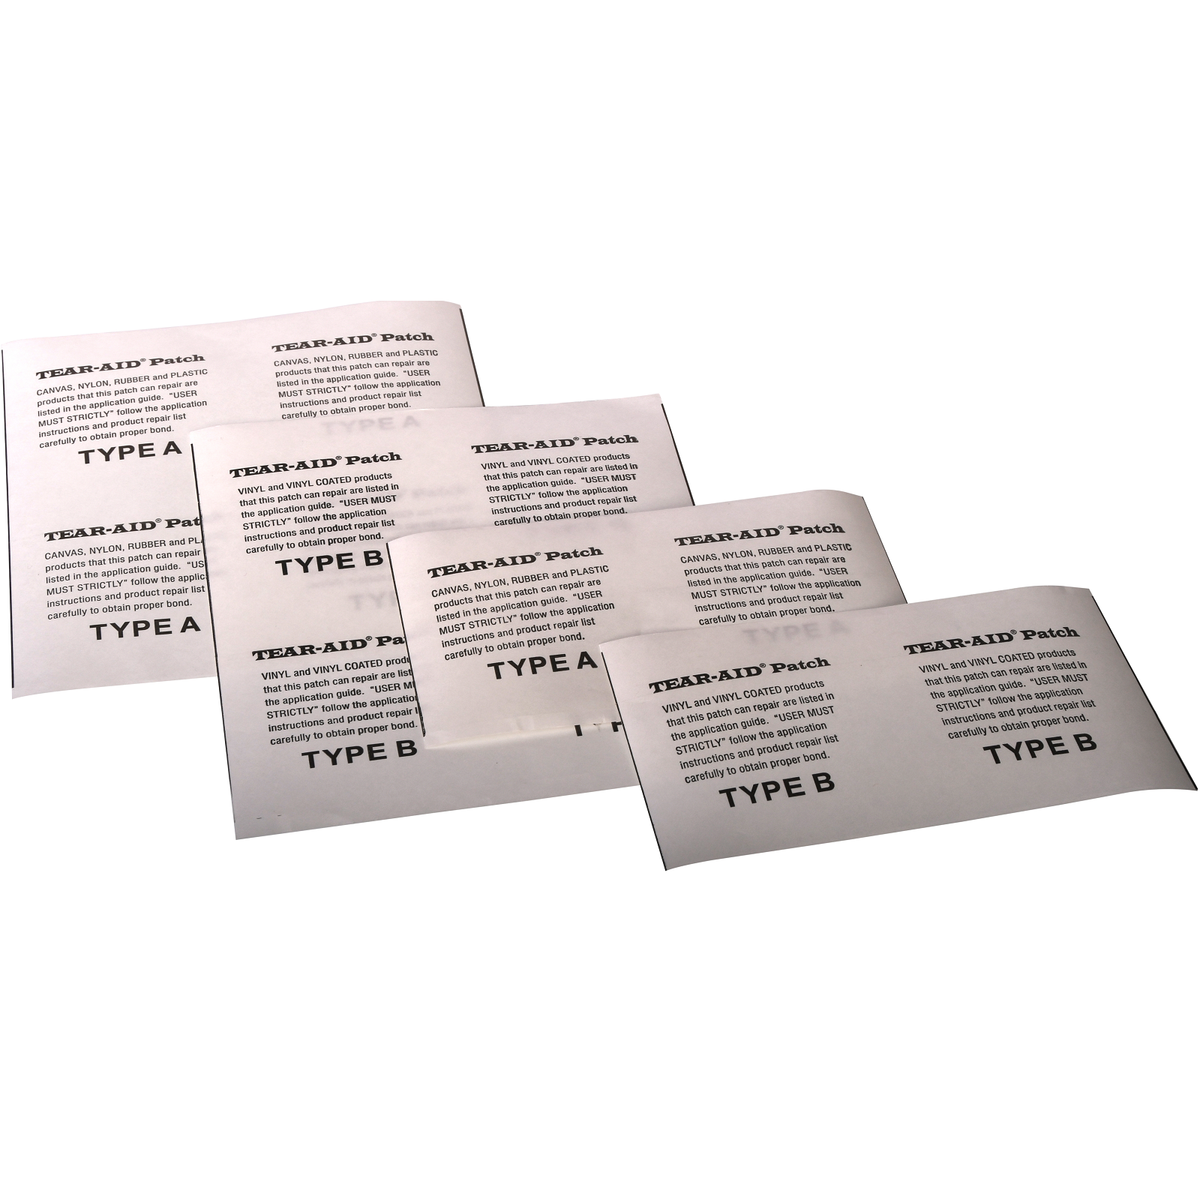 5016SV Handle With Care Rippa - Shipping Rippa labels - Rippa